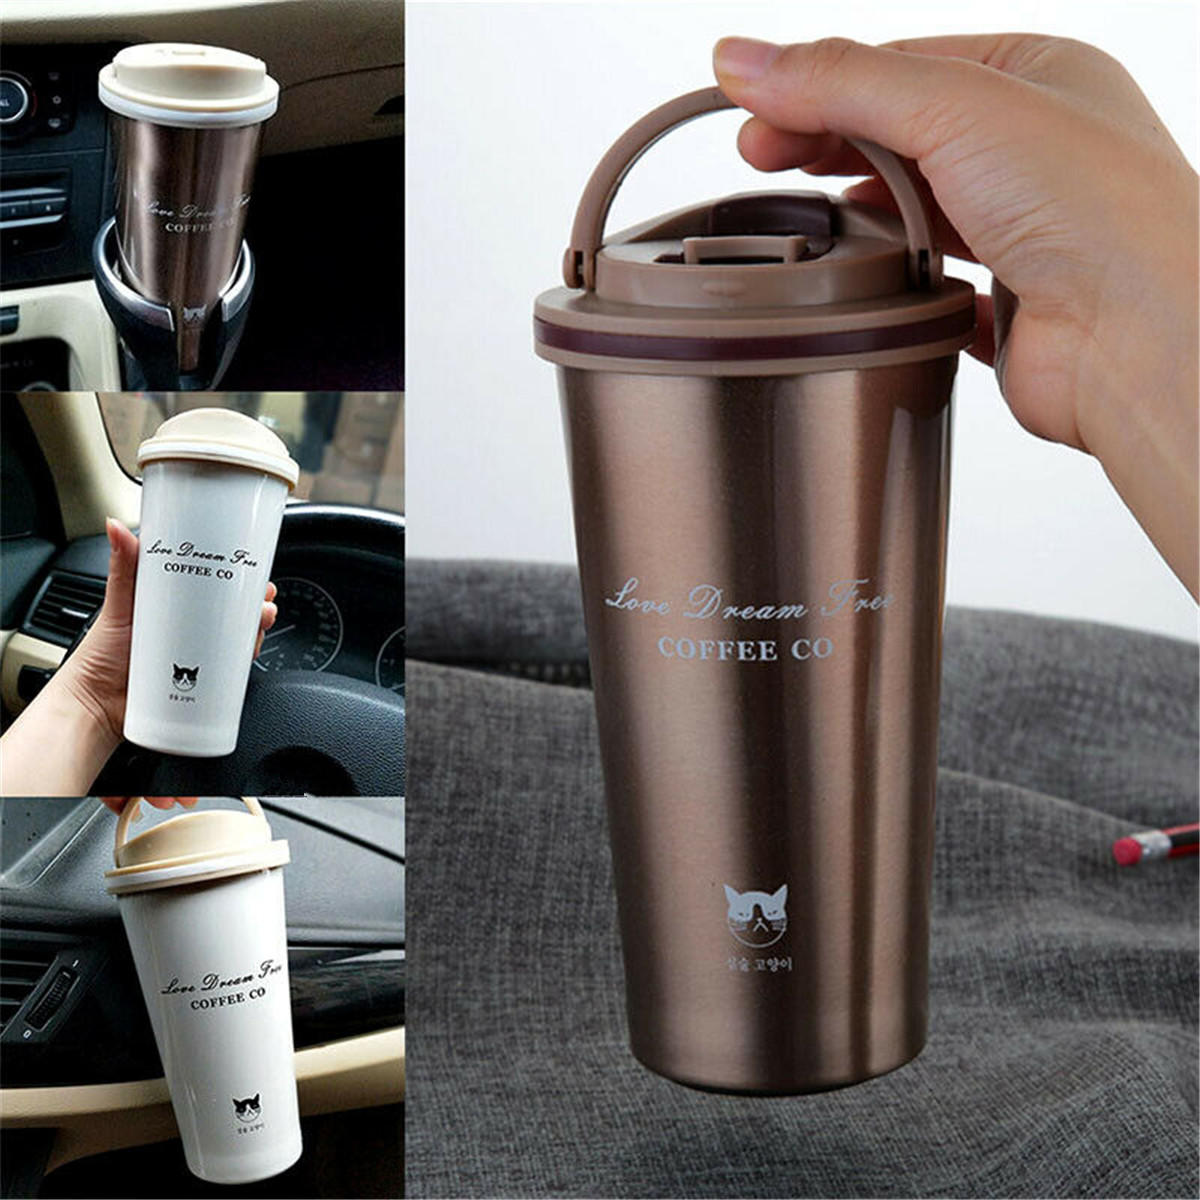 Brown loiofoe 340ML Stainless Steel Insulated Coffee Cup Vacuum Insulated Tumbler Thermos Travel Coffee Mug for Hot/Cold Drinks Dishwasher Safe